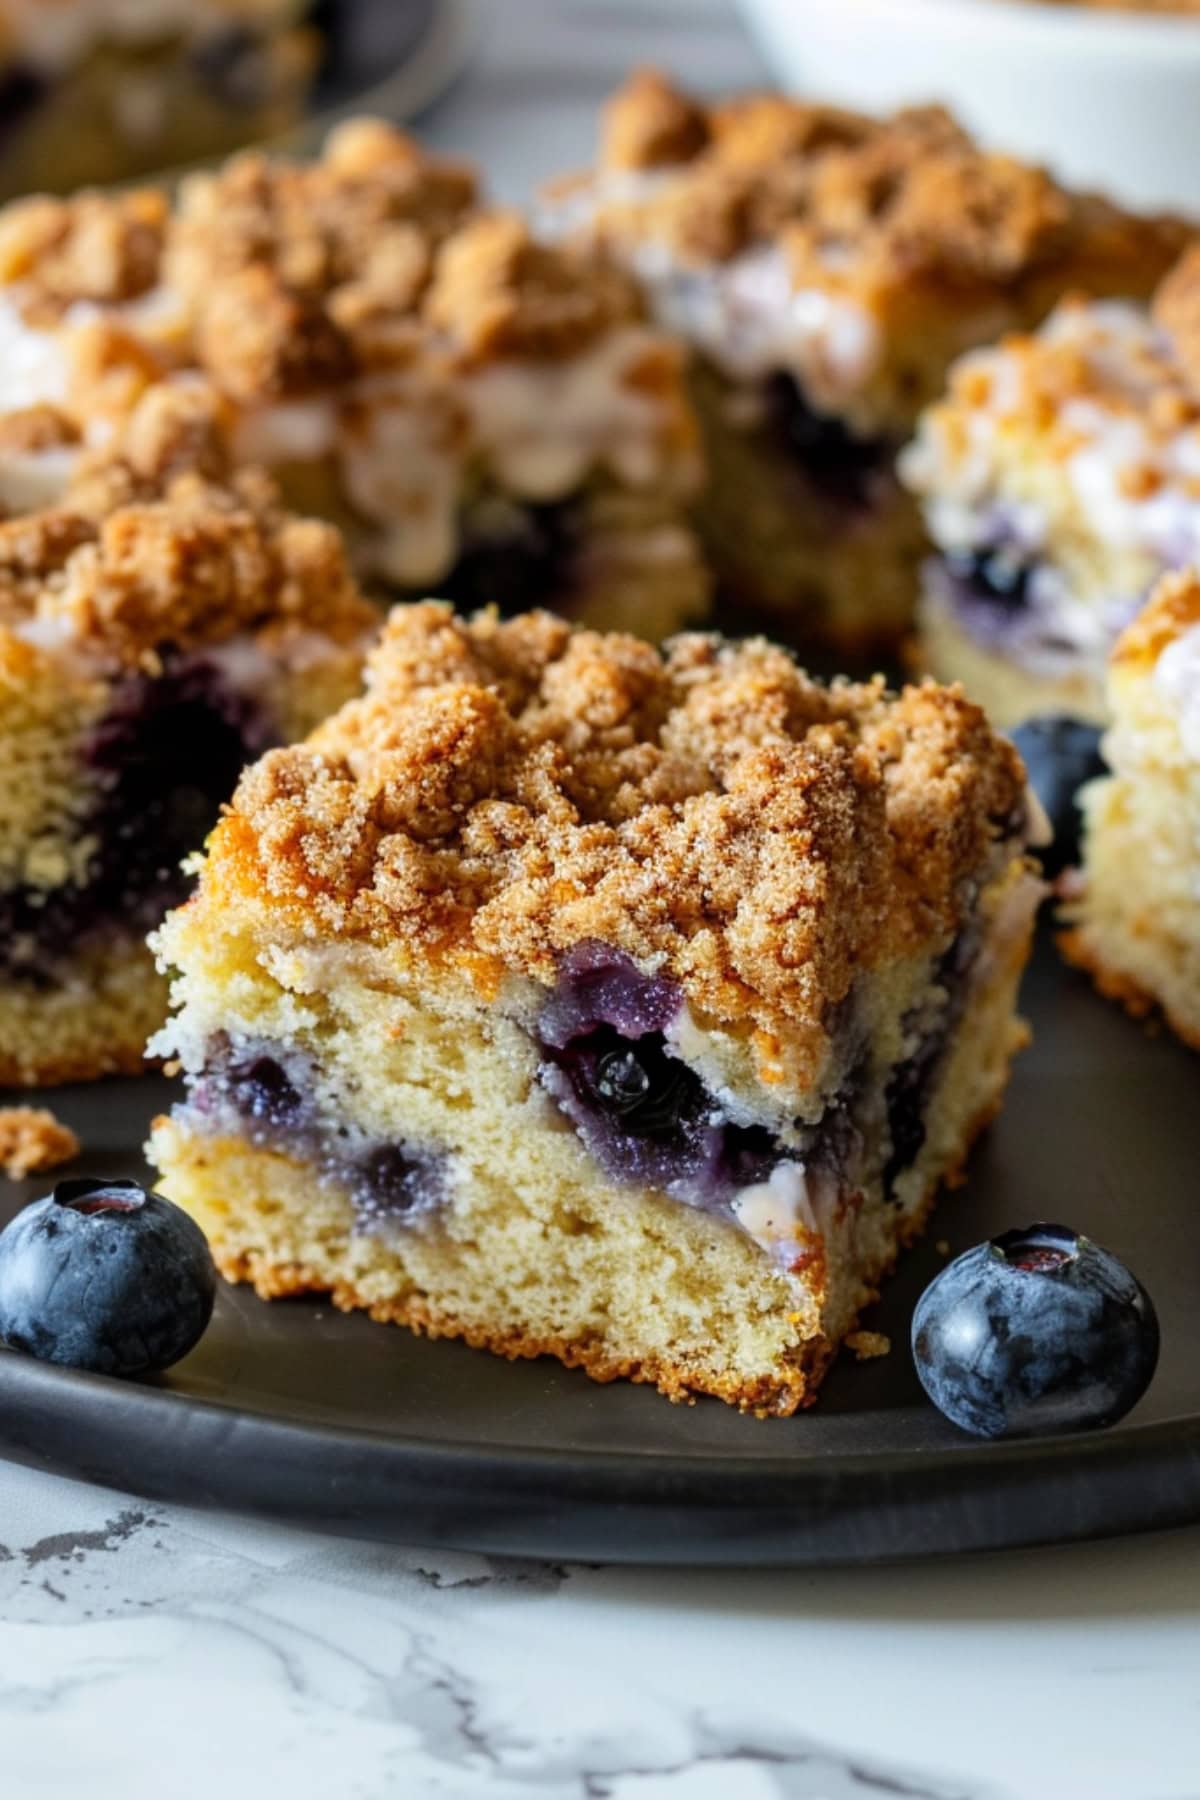 Classic blueberry coffee cake, a delightful treat with streusel crumb and a hint of vanilla.